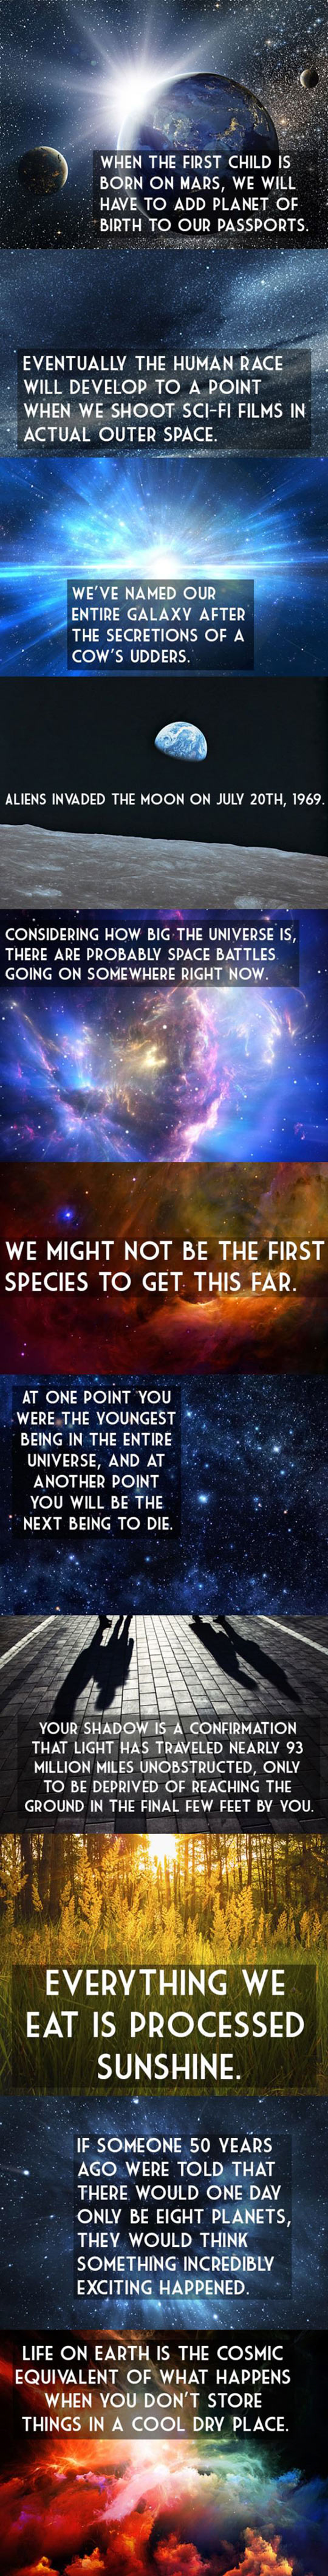 Fun things about the universe